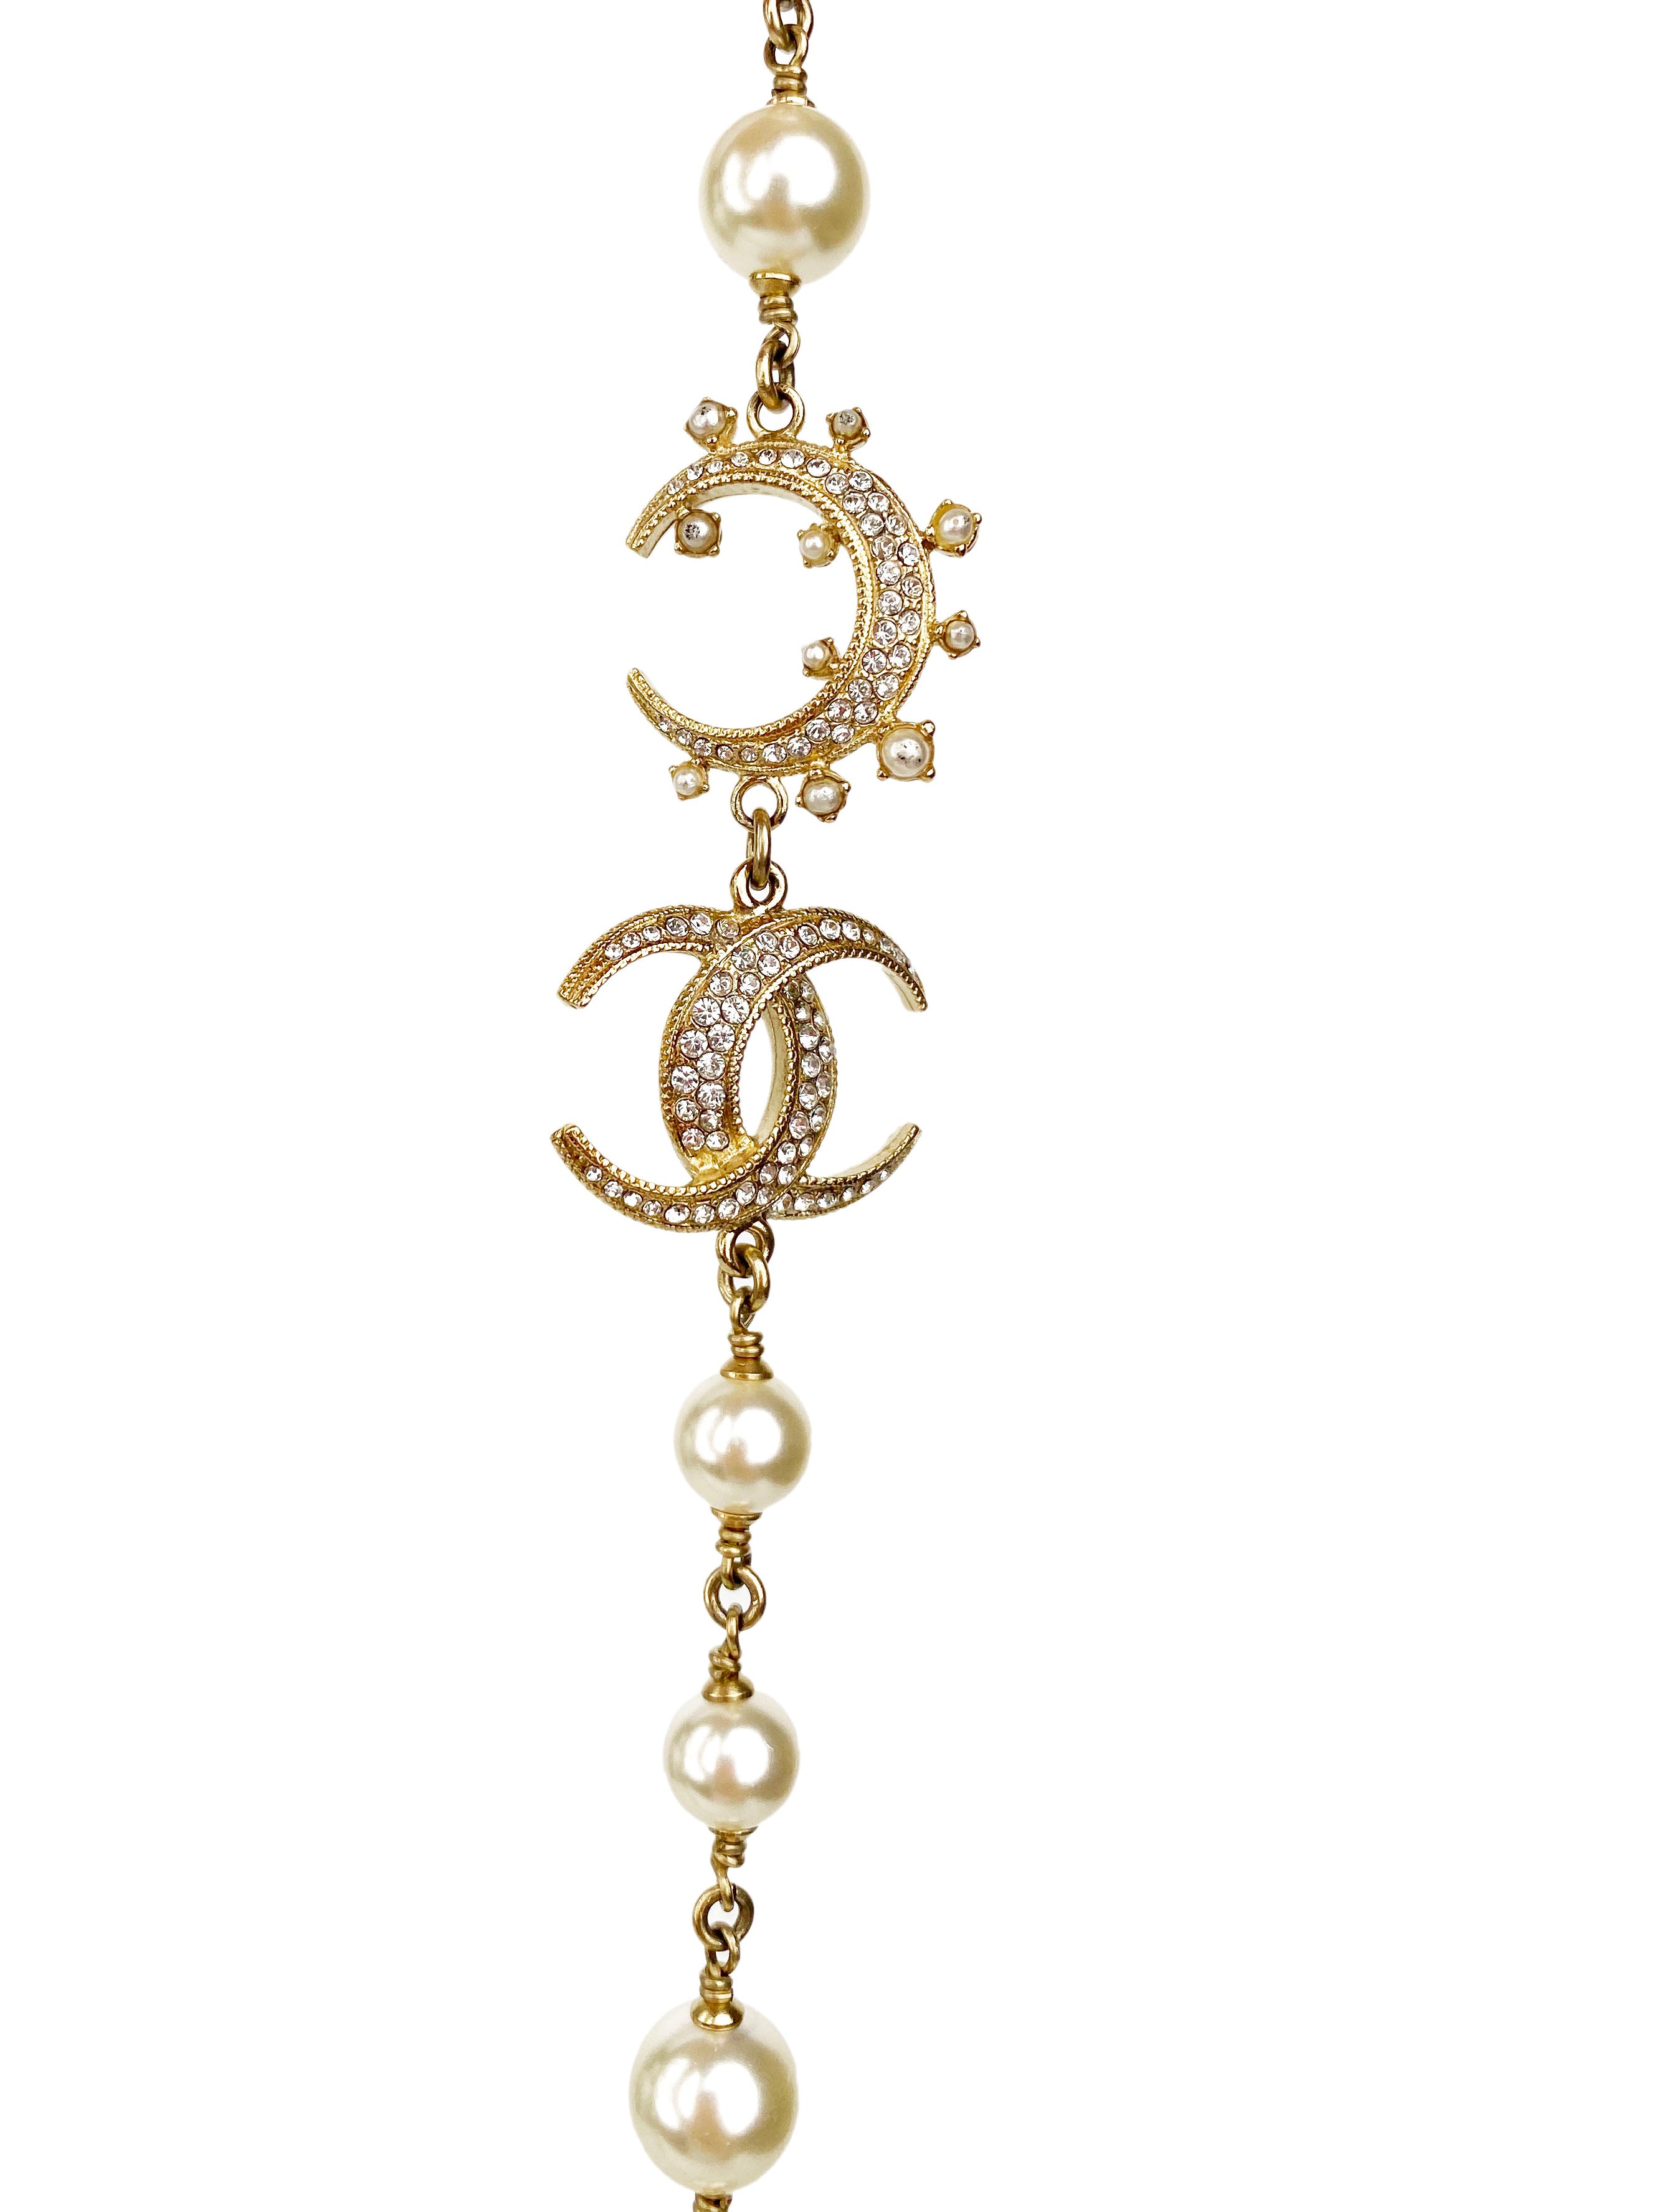 Chanel Long Pearl & Crescent Moon Necklace